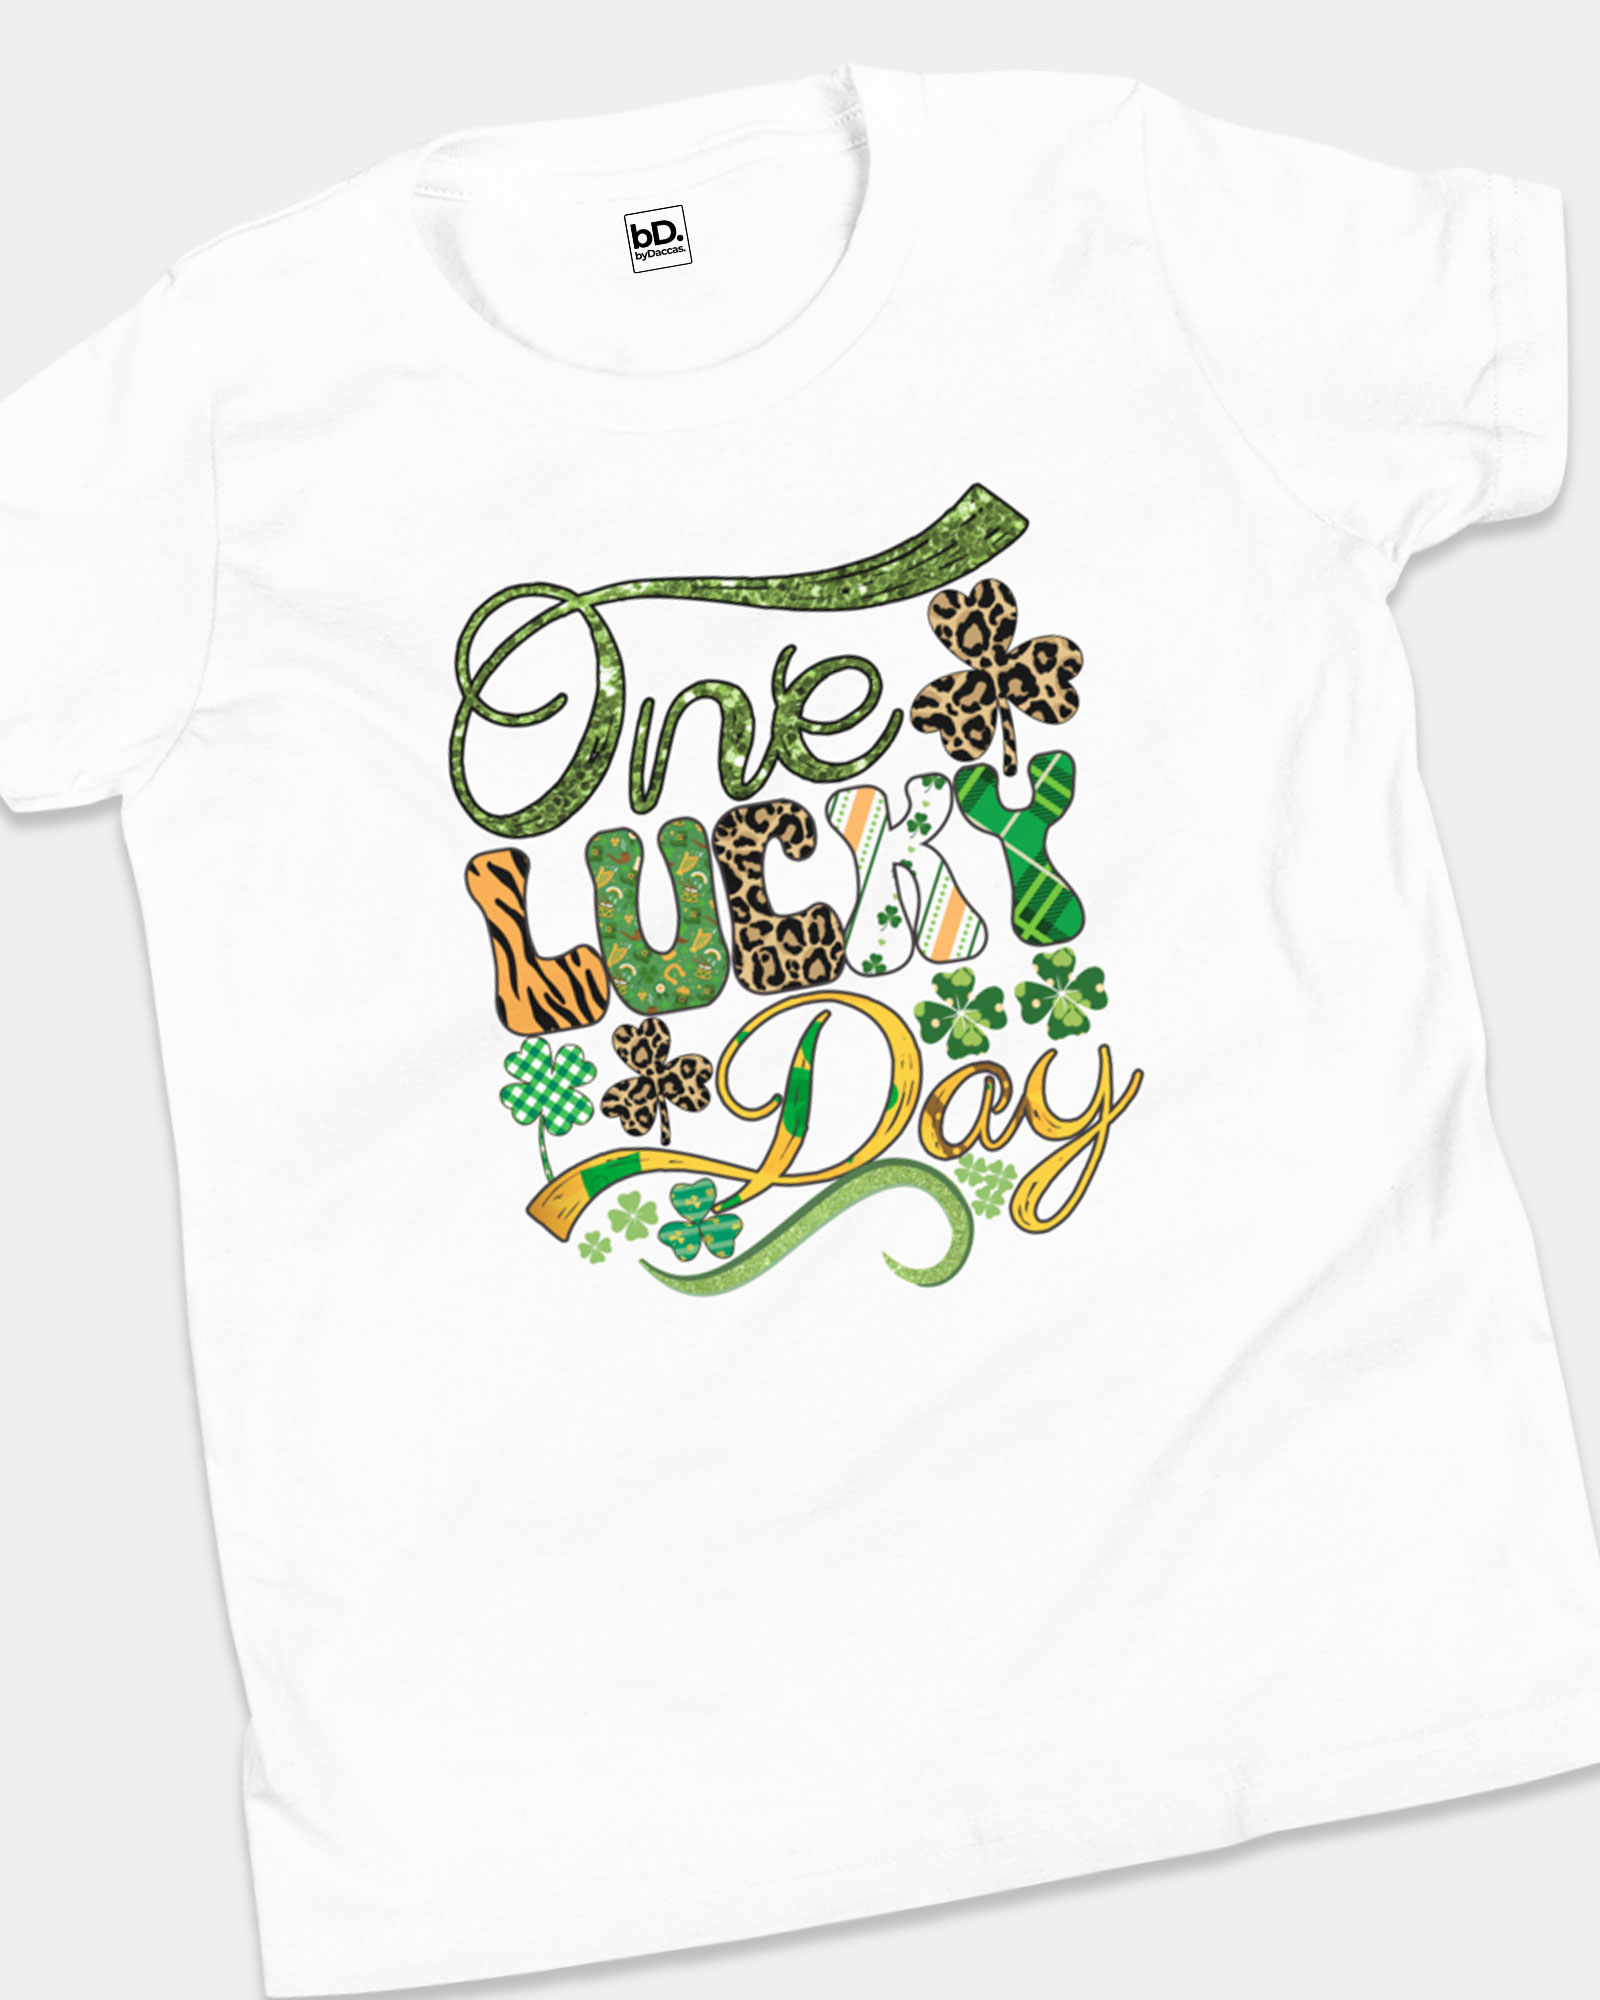 T-shirt for kid - St. Patrick’s Day